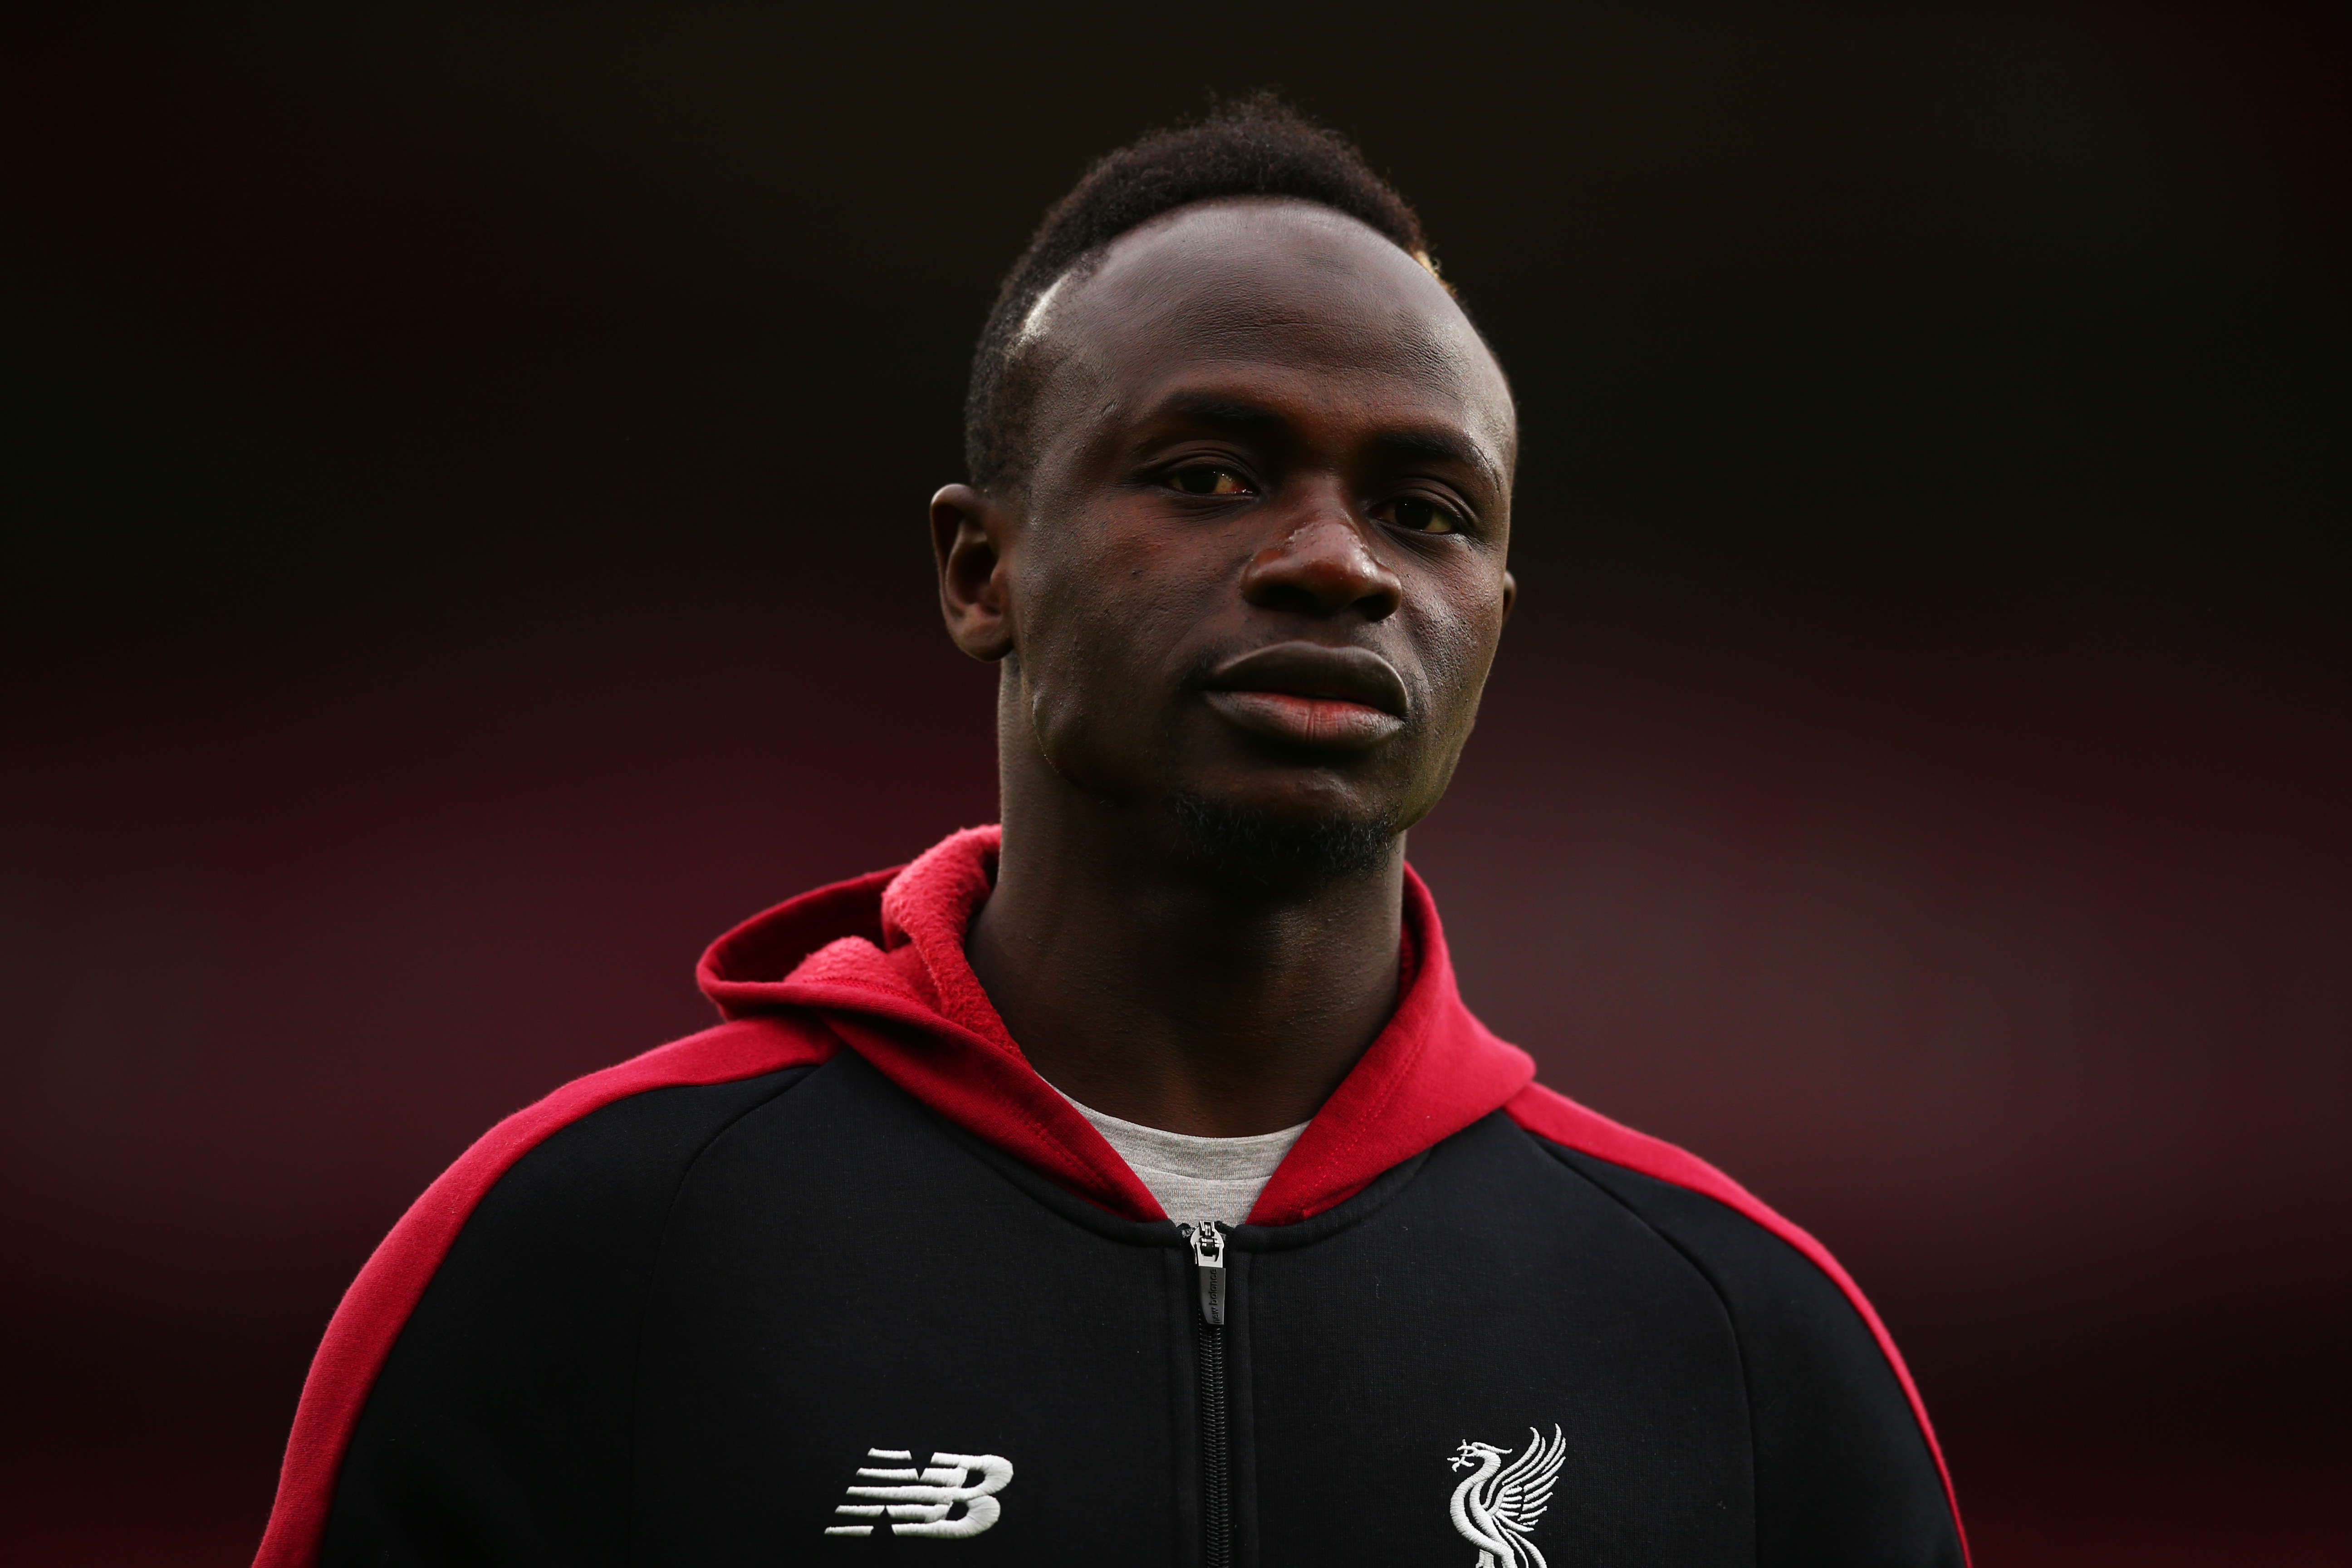 BOURNEMOUTH, ENGLAND - DECEMBER 08:  Sadio Mane of Liverpool looks on prior to the Premier League match between AFC Bournemouth and Liverpool FC at Vitality Stadium on December 8, 2018 in Bournemouth, United Kingdom.  (Photo by Dan Istitene/Getty Images)